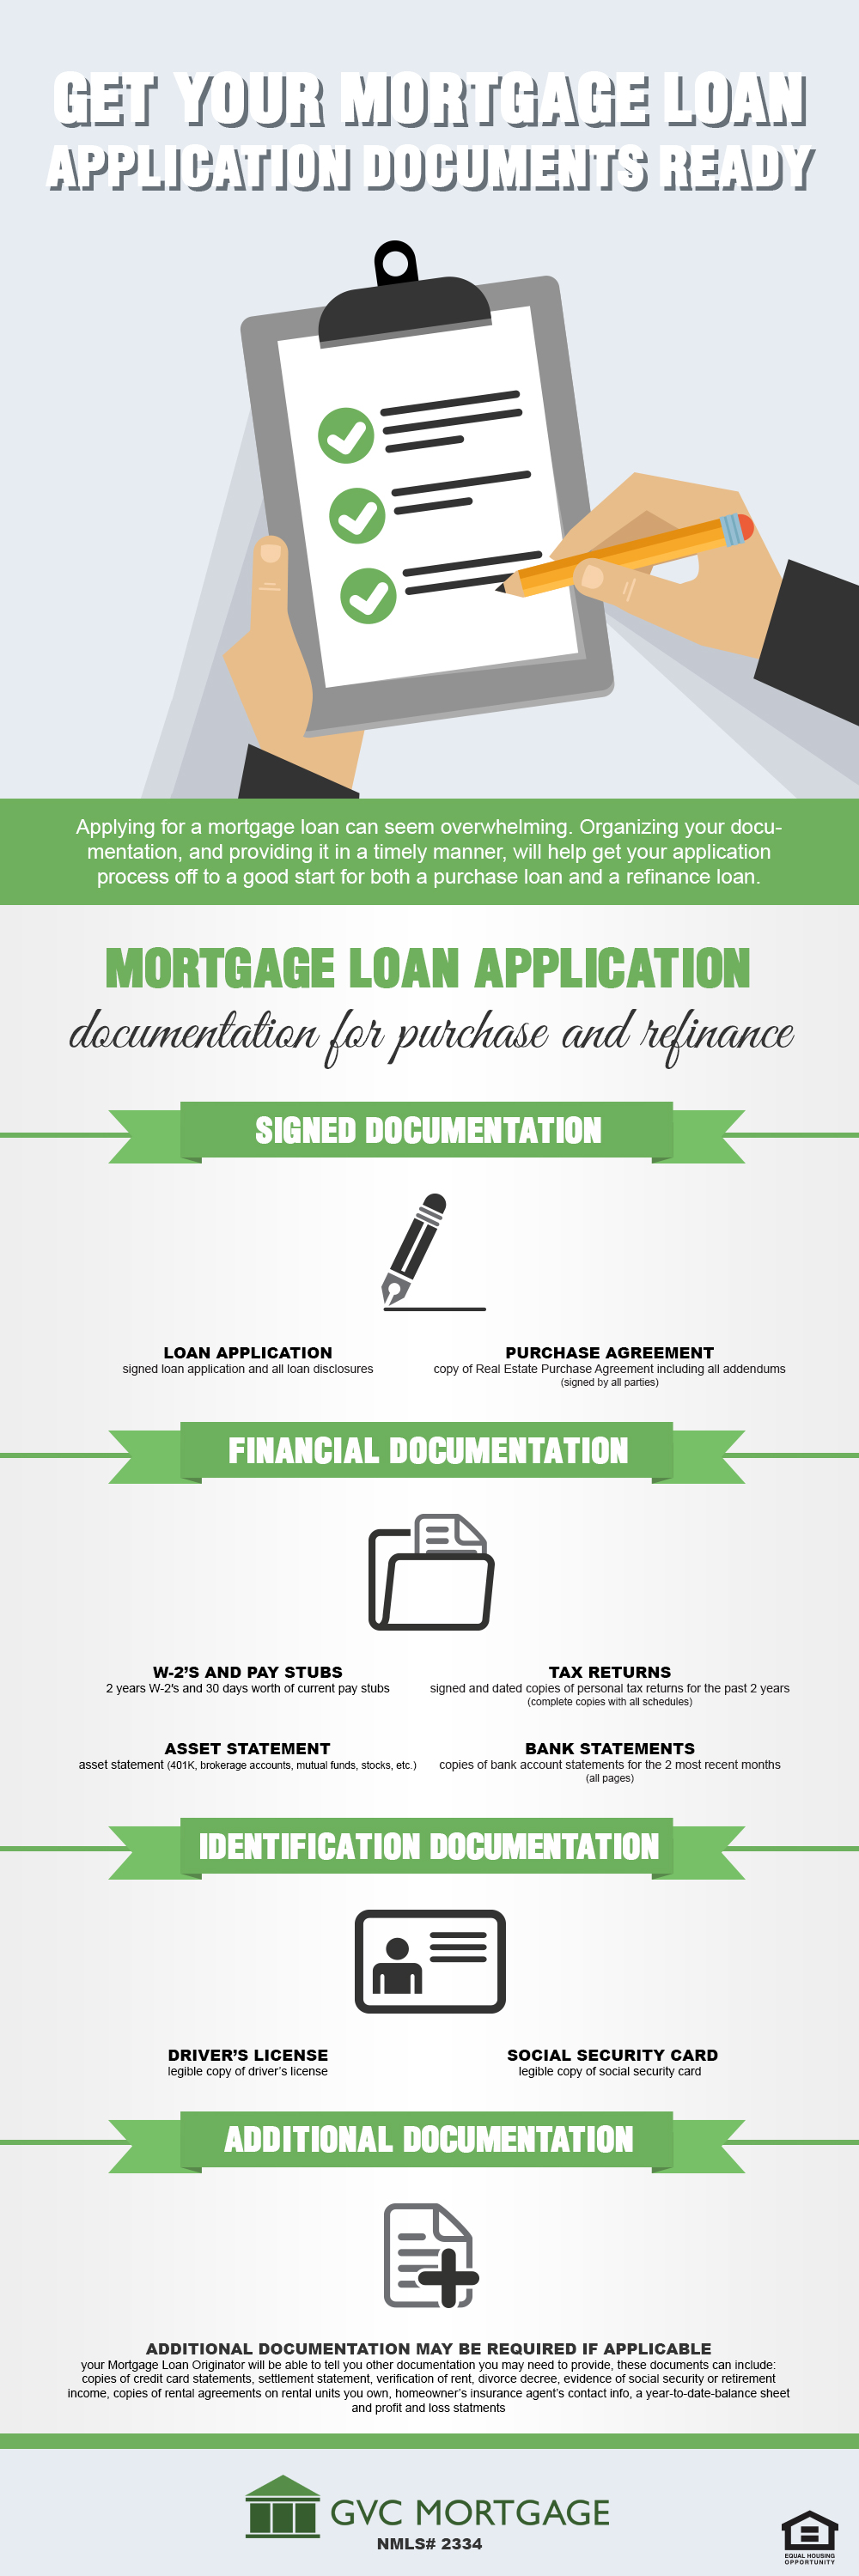 Loan application requirements